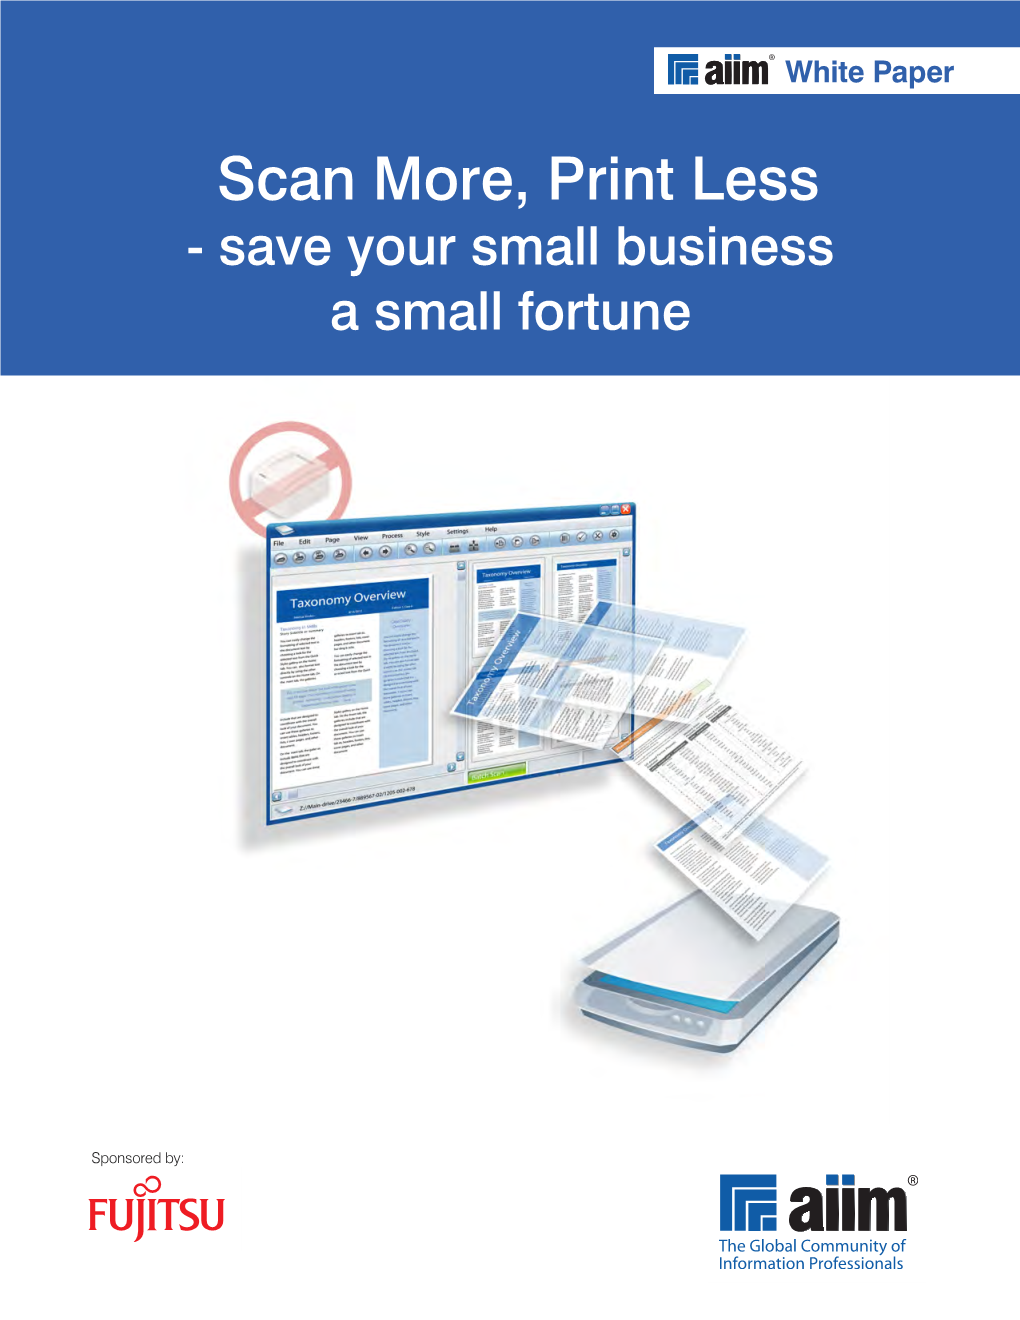 Scan More, Print Less - Save Your Small Business a Small Fortune